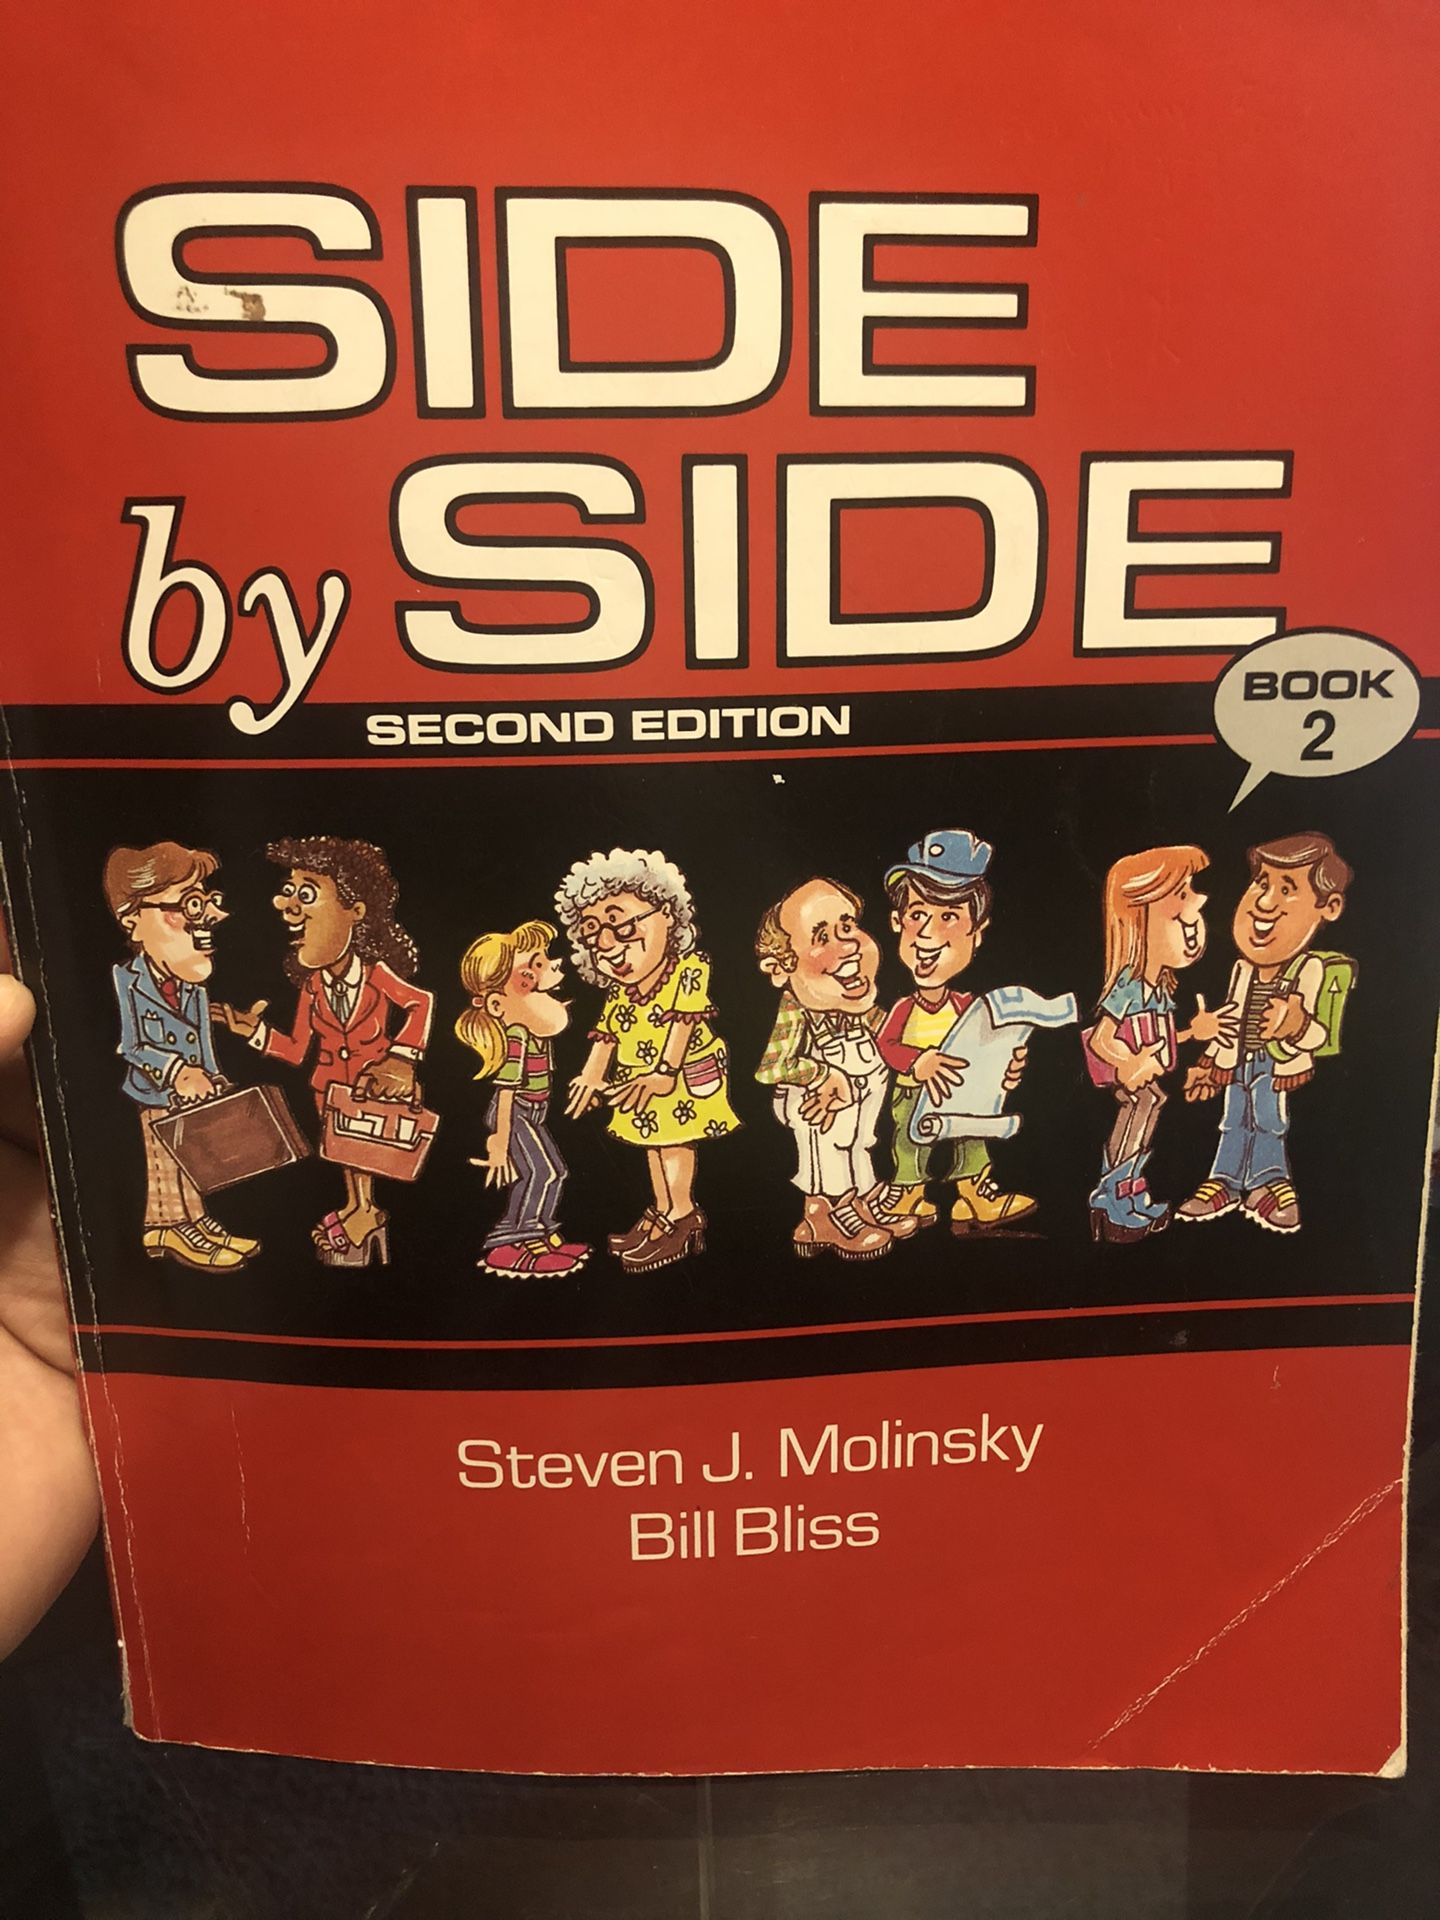 Side by side second edition (book 2)